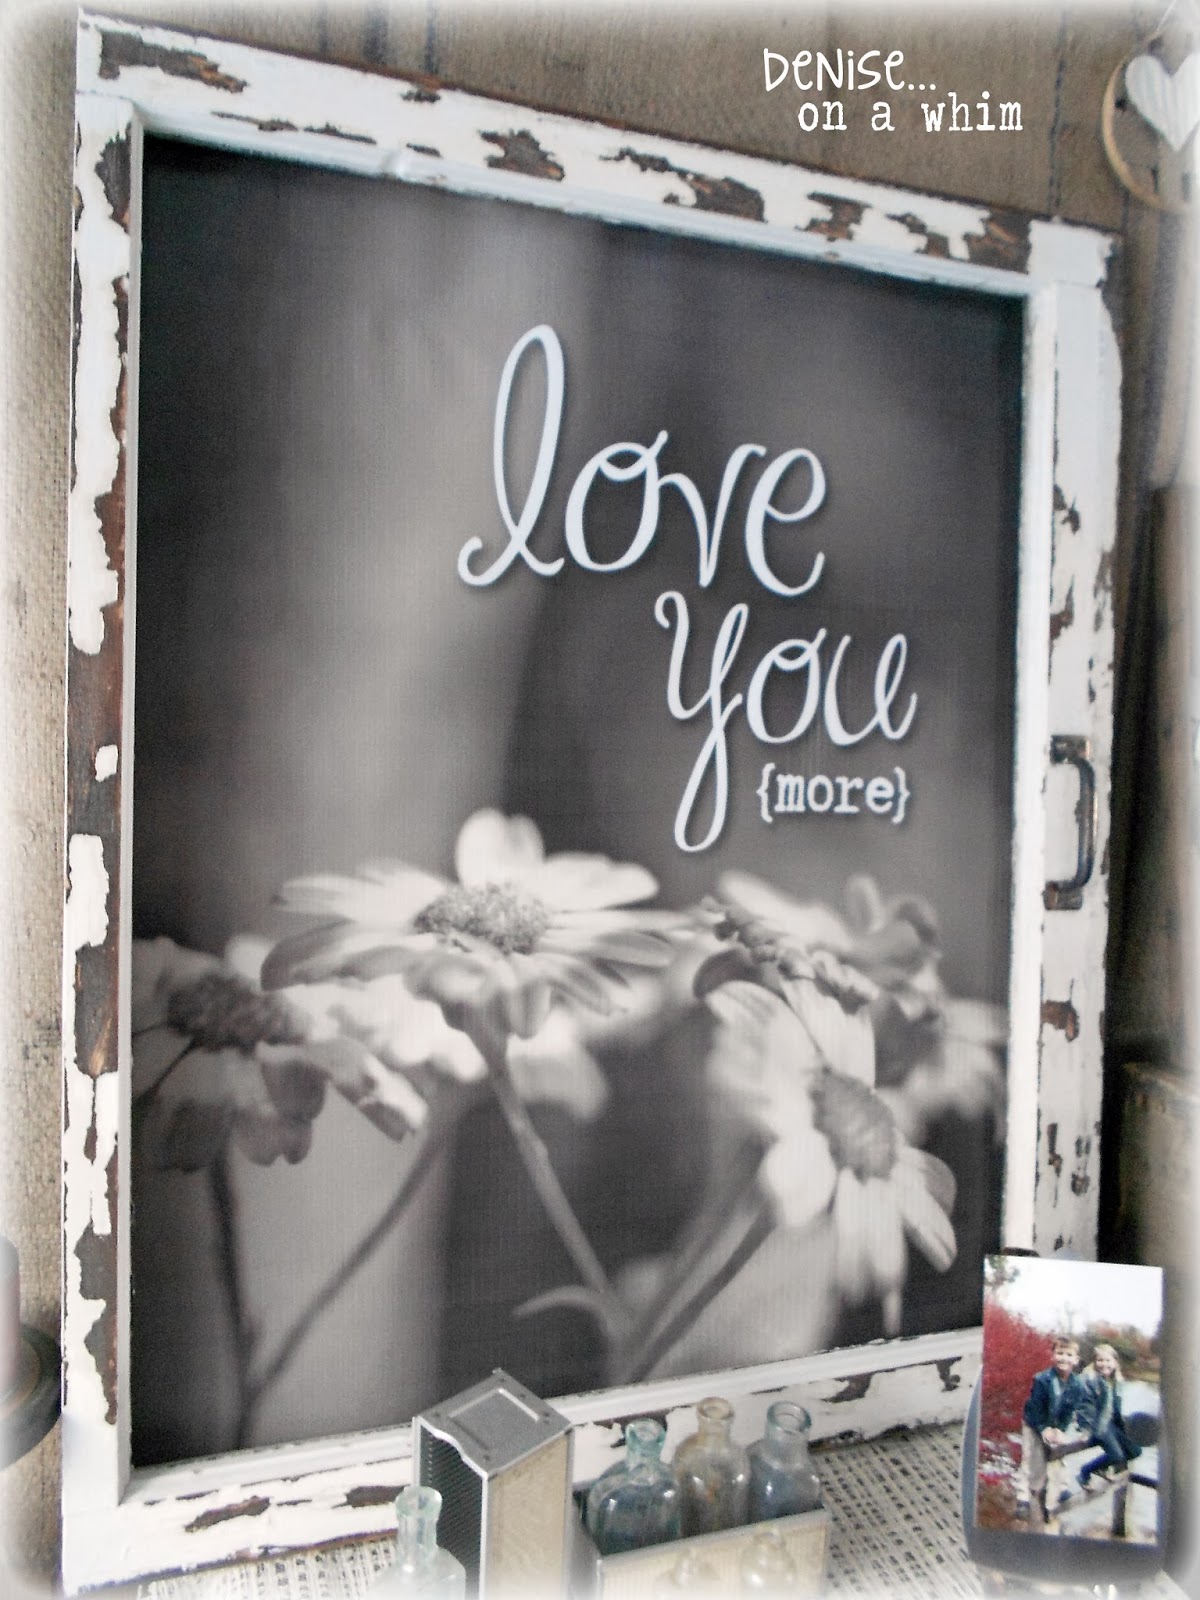 Romantic Photo as Background for a Love Sign via http:/deniseonawhim.blogspot.com